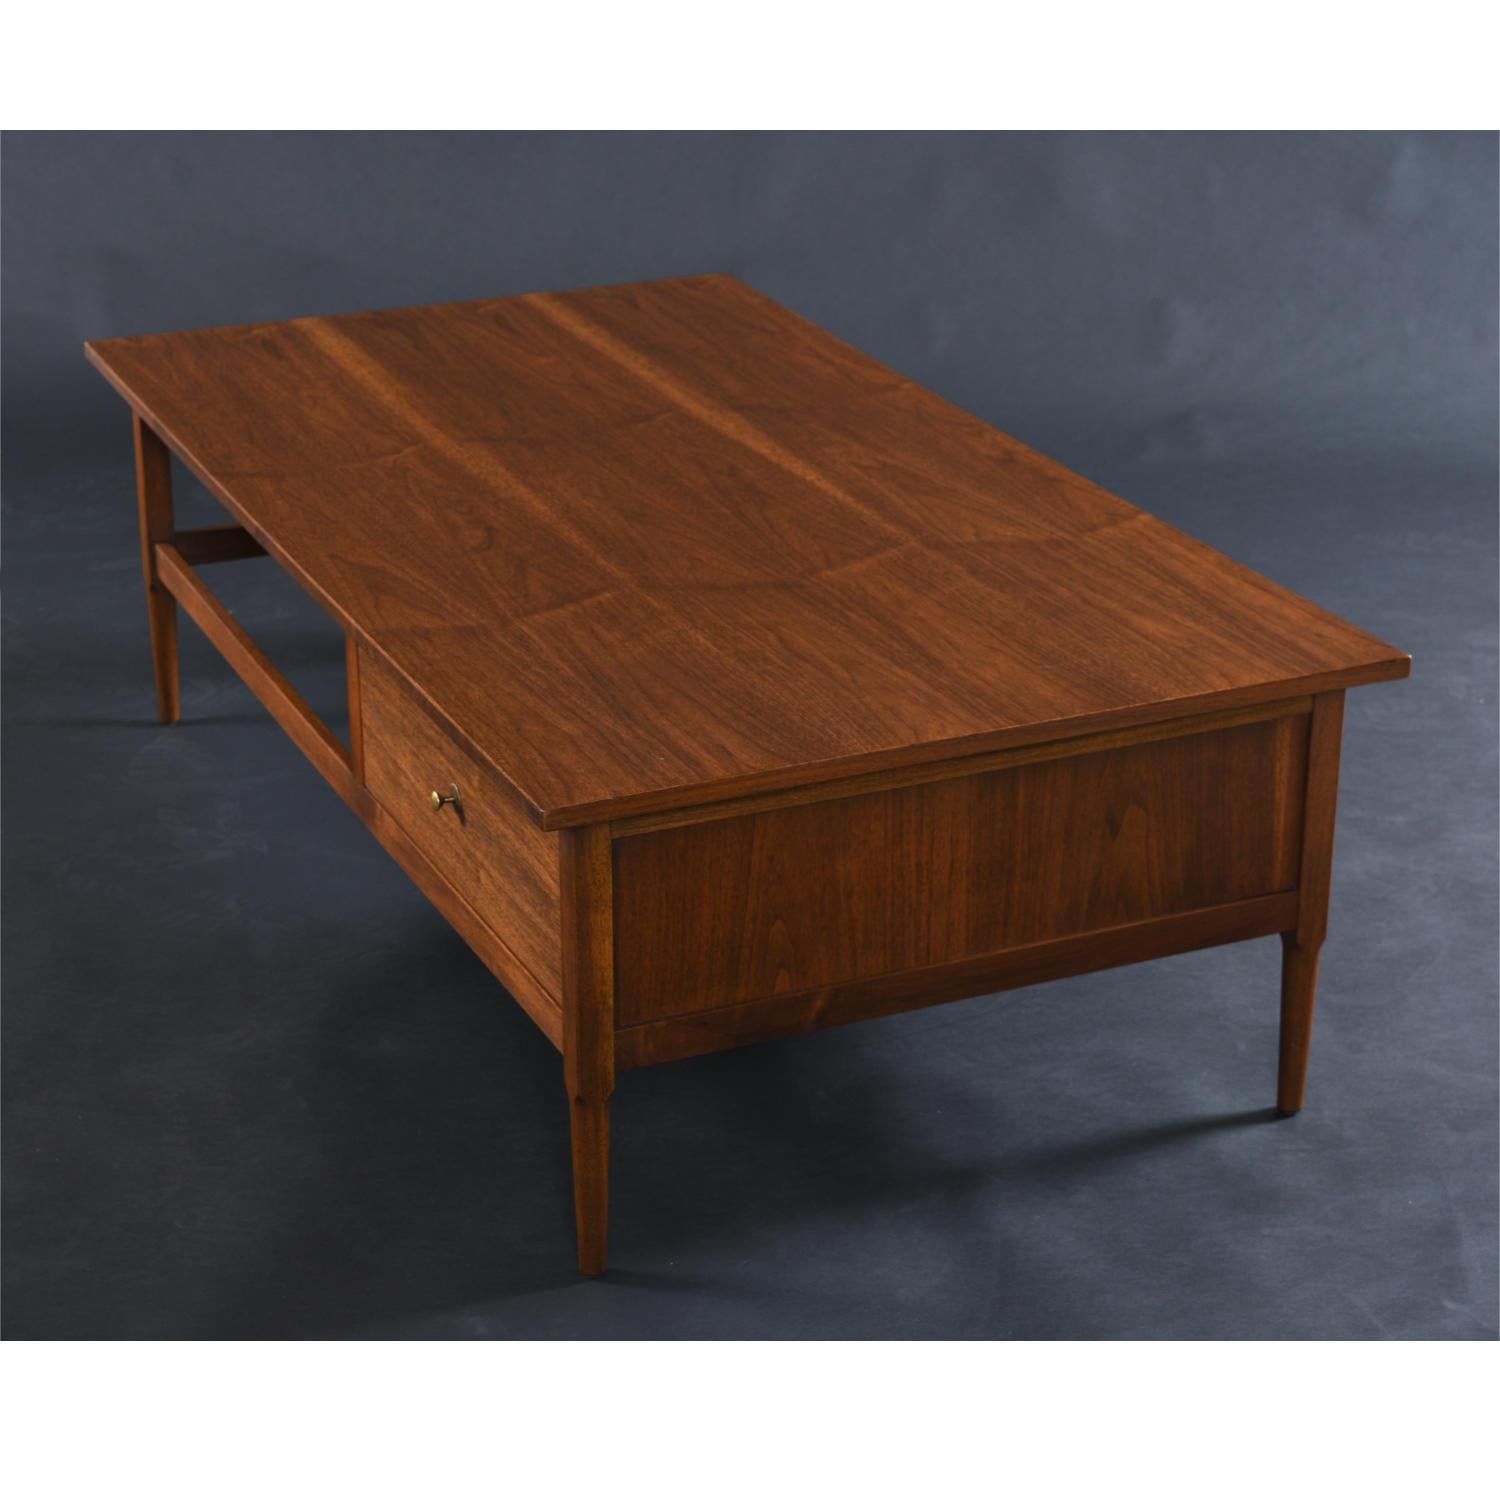 American Lawrence Peabody for Richardson Nemschoff Walnut Coffee Table with Drawer For Sale